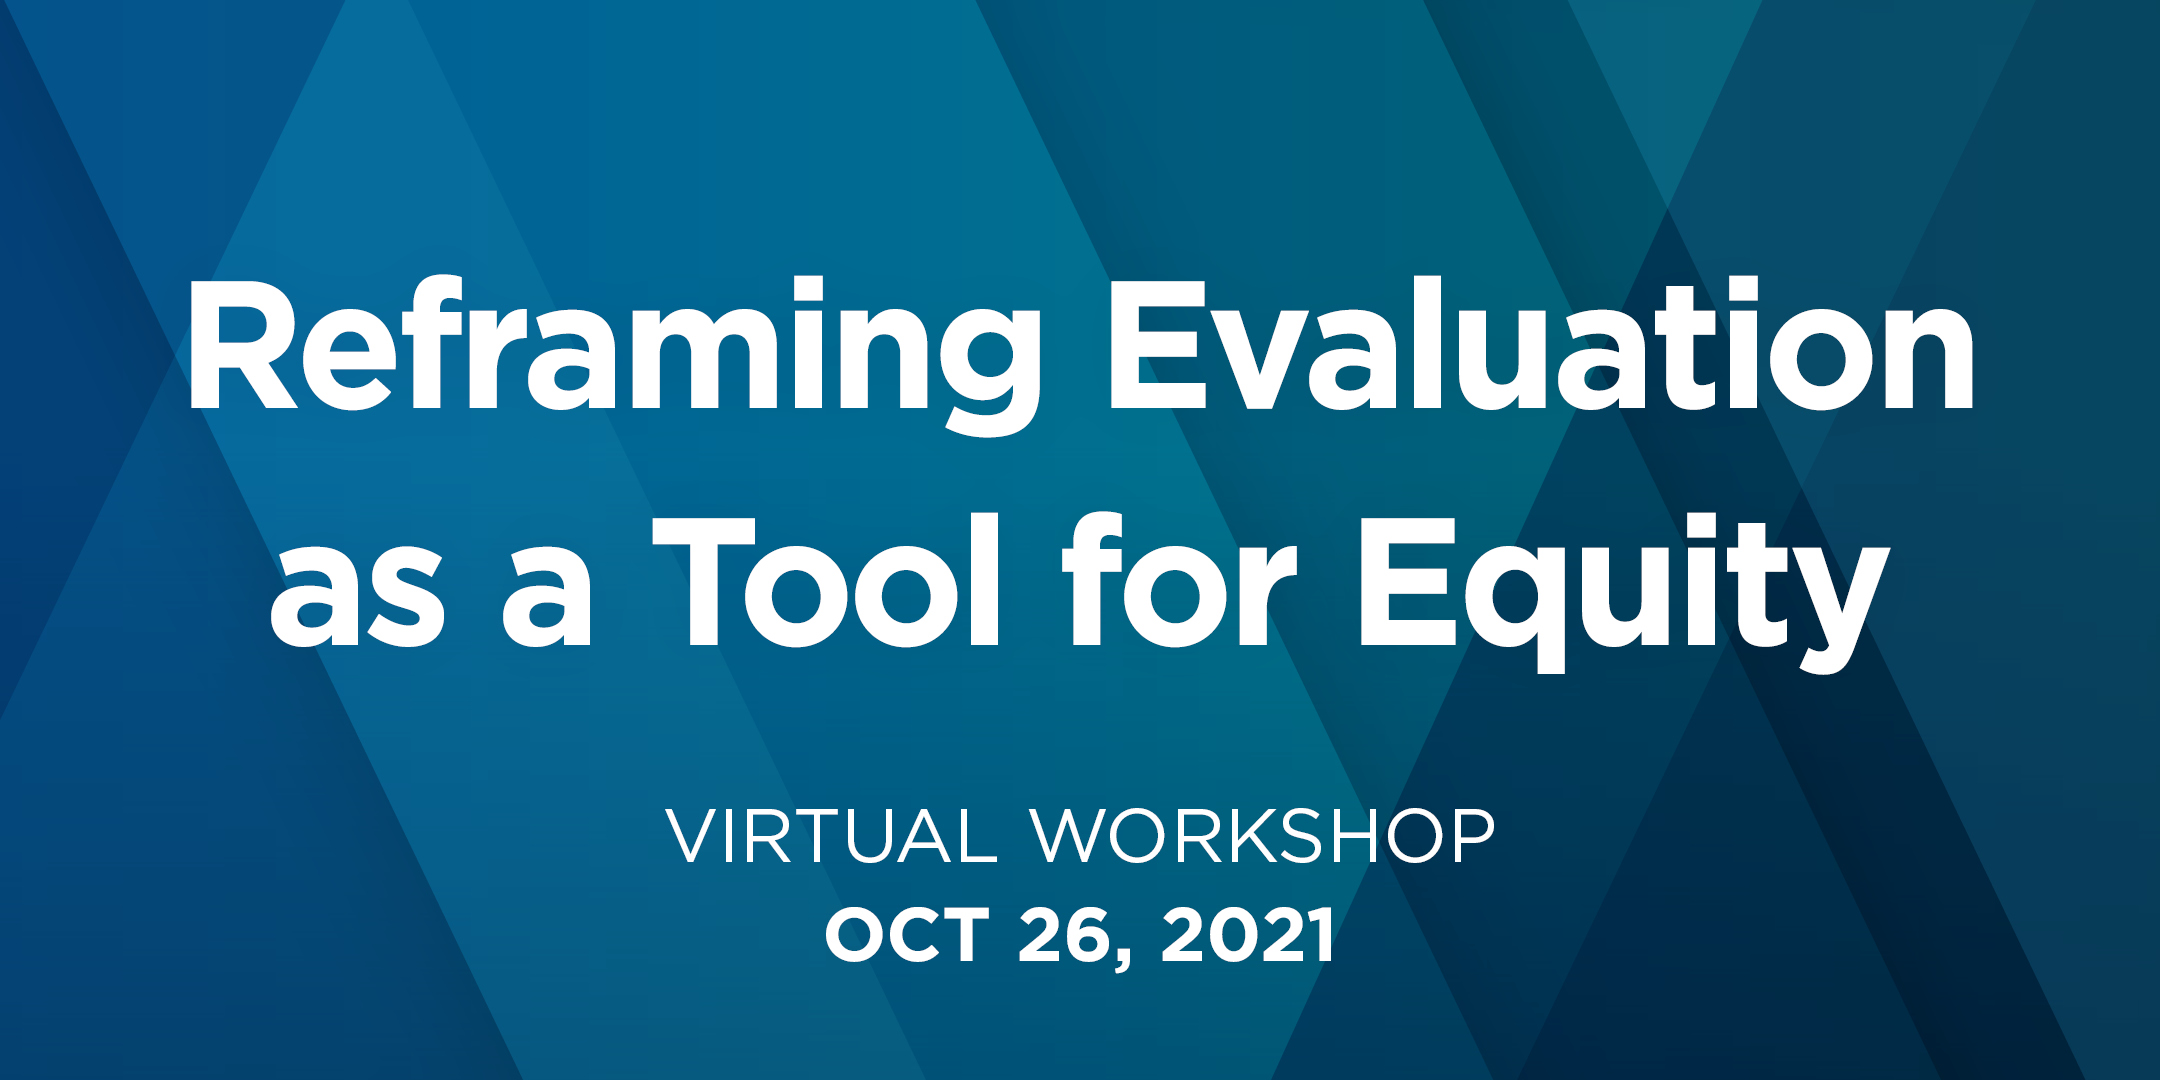 Reframing Evaluation as a Tool for Equity